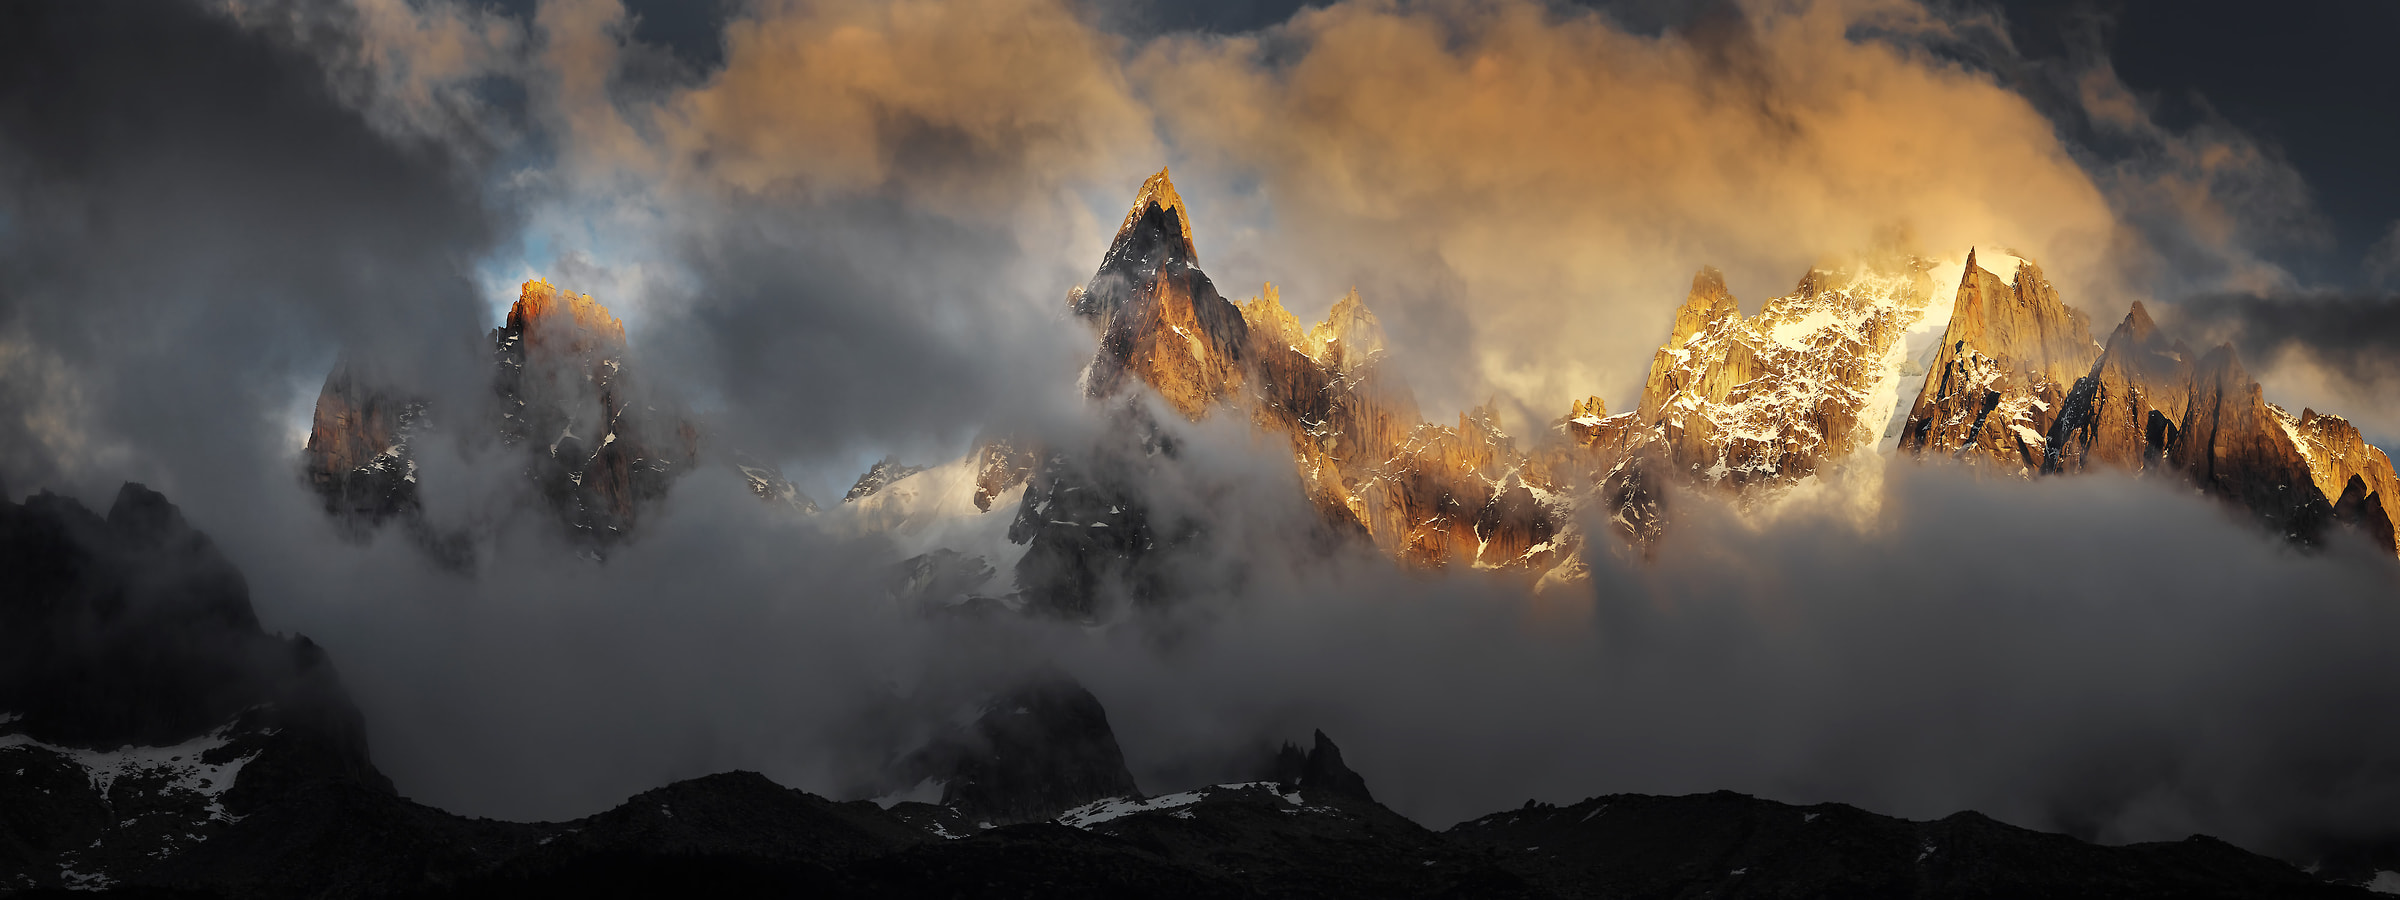 209 megapixels! A very high resolution, large-format VAST photo of stunning mountains at sunset with clouds and fog; fine art landscape print created by Alexandre Deschaumes in Chamonix, France.